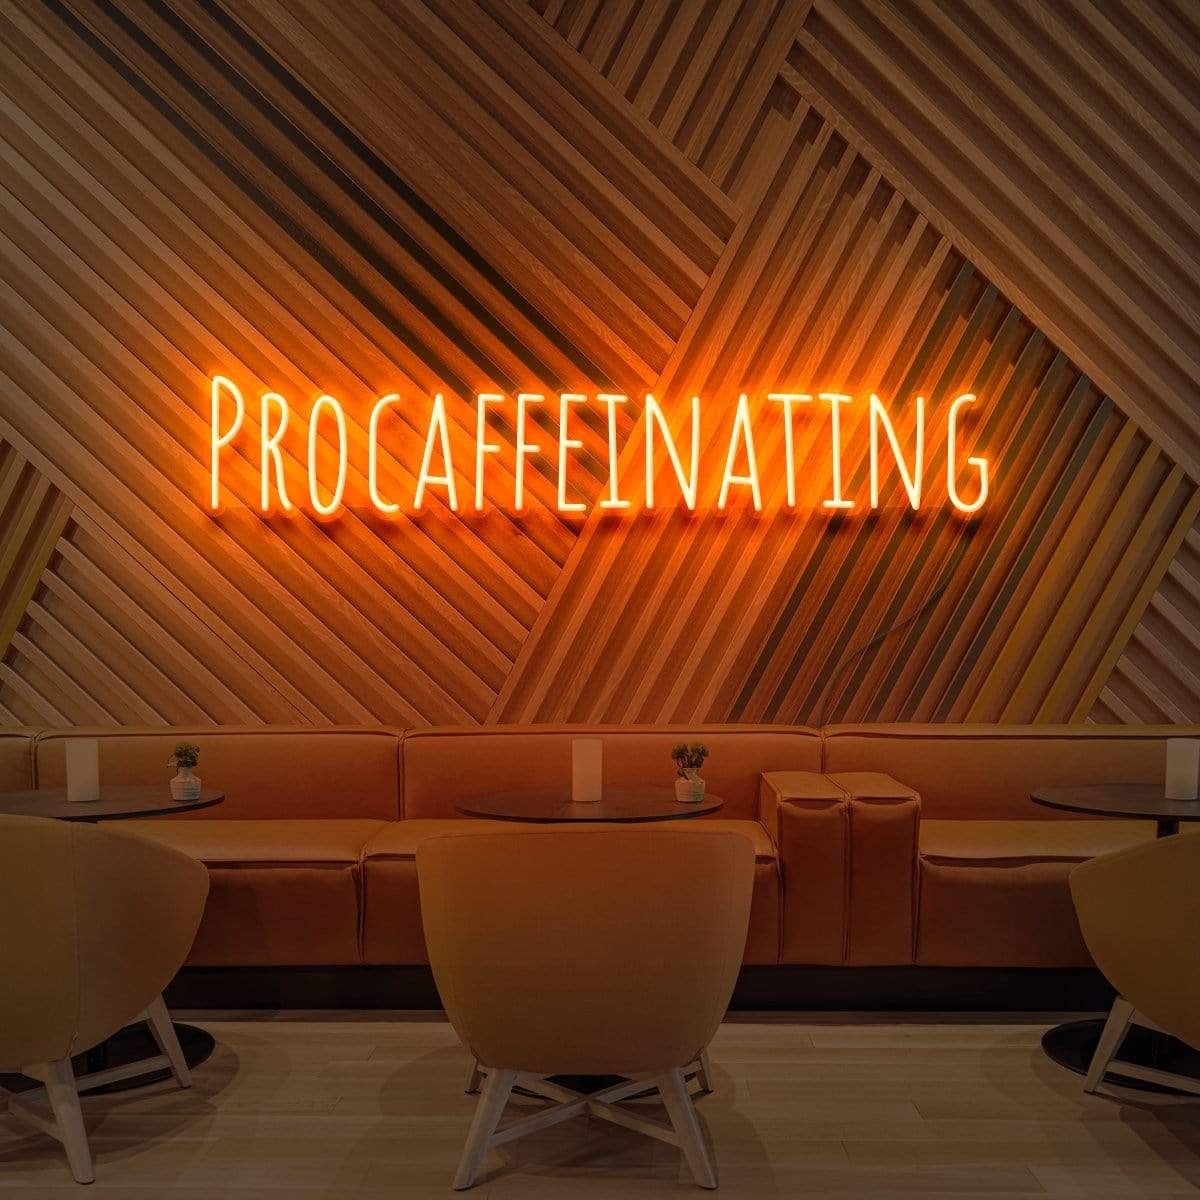 "Procaffeinating" Neon Sign for Cafés 60cm (2ft) / Orange / LED Neon by Neon Icons